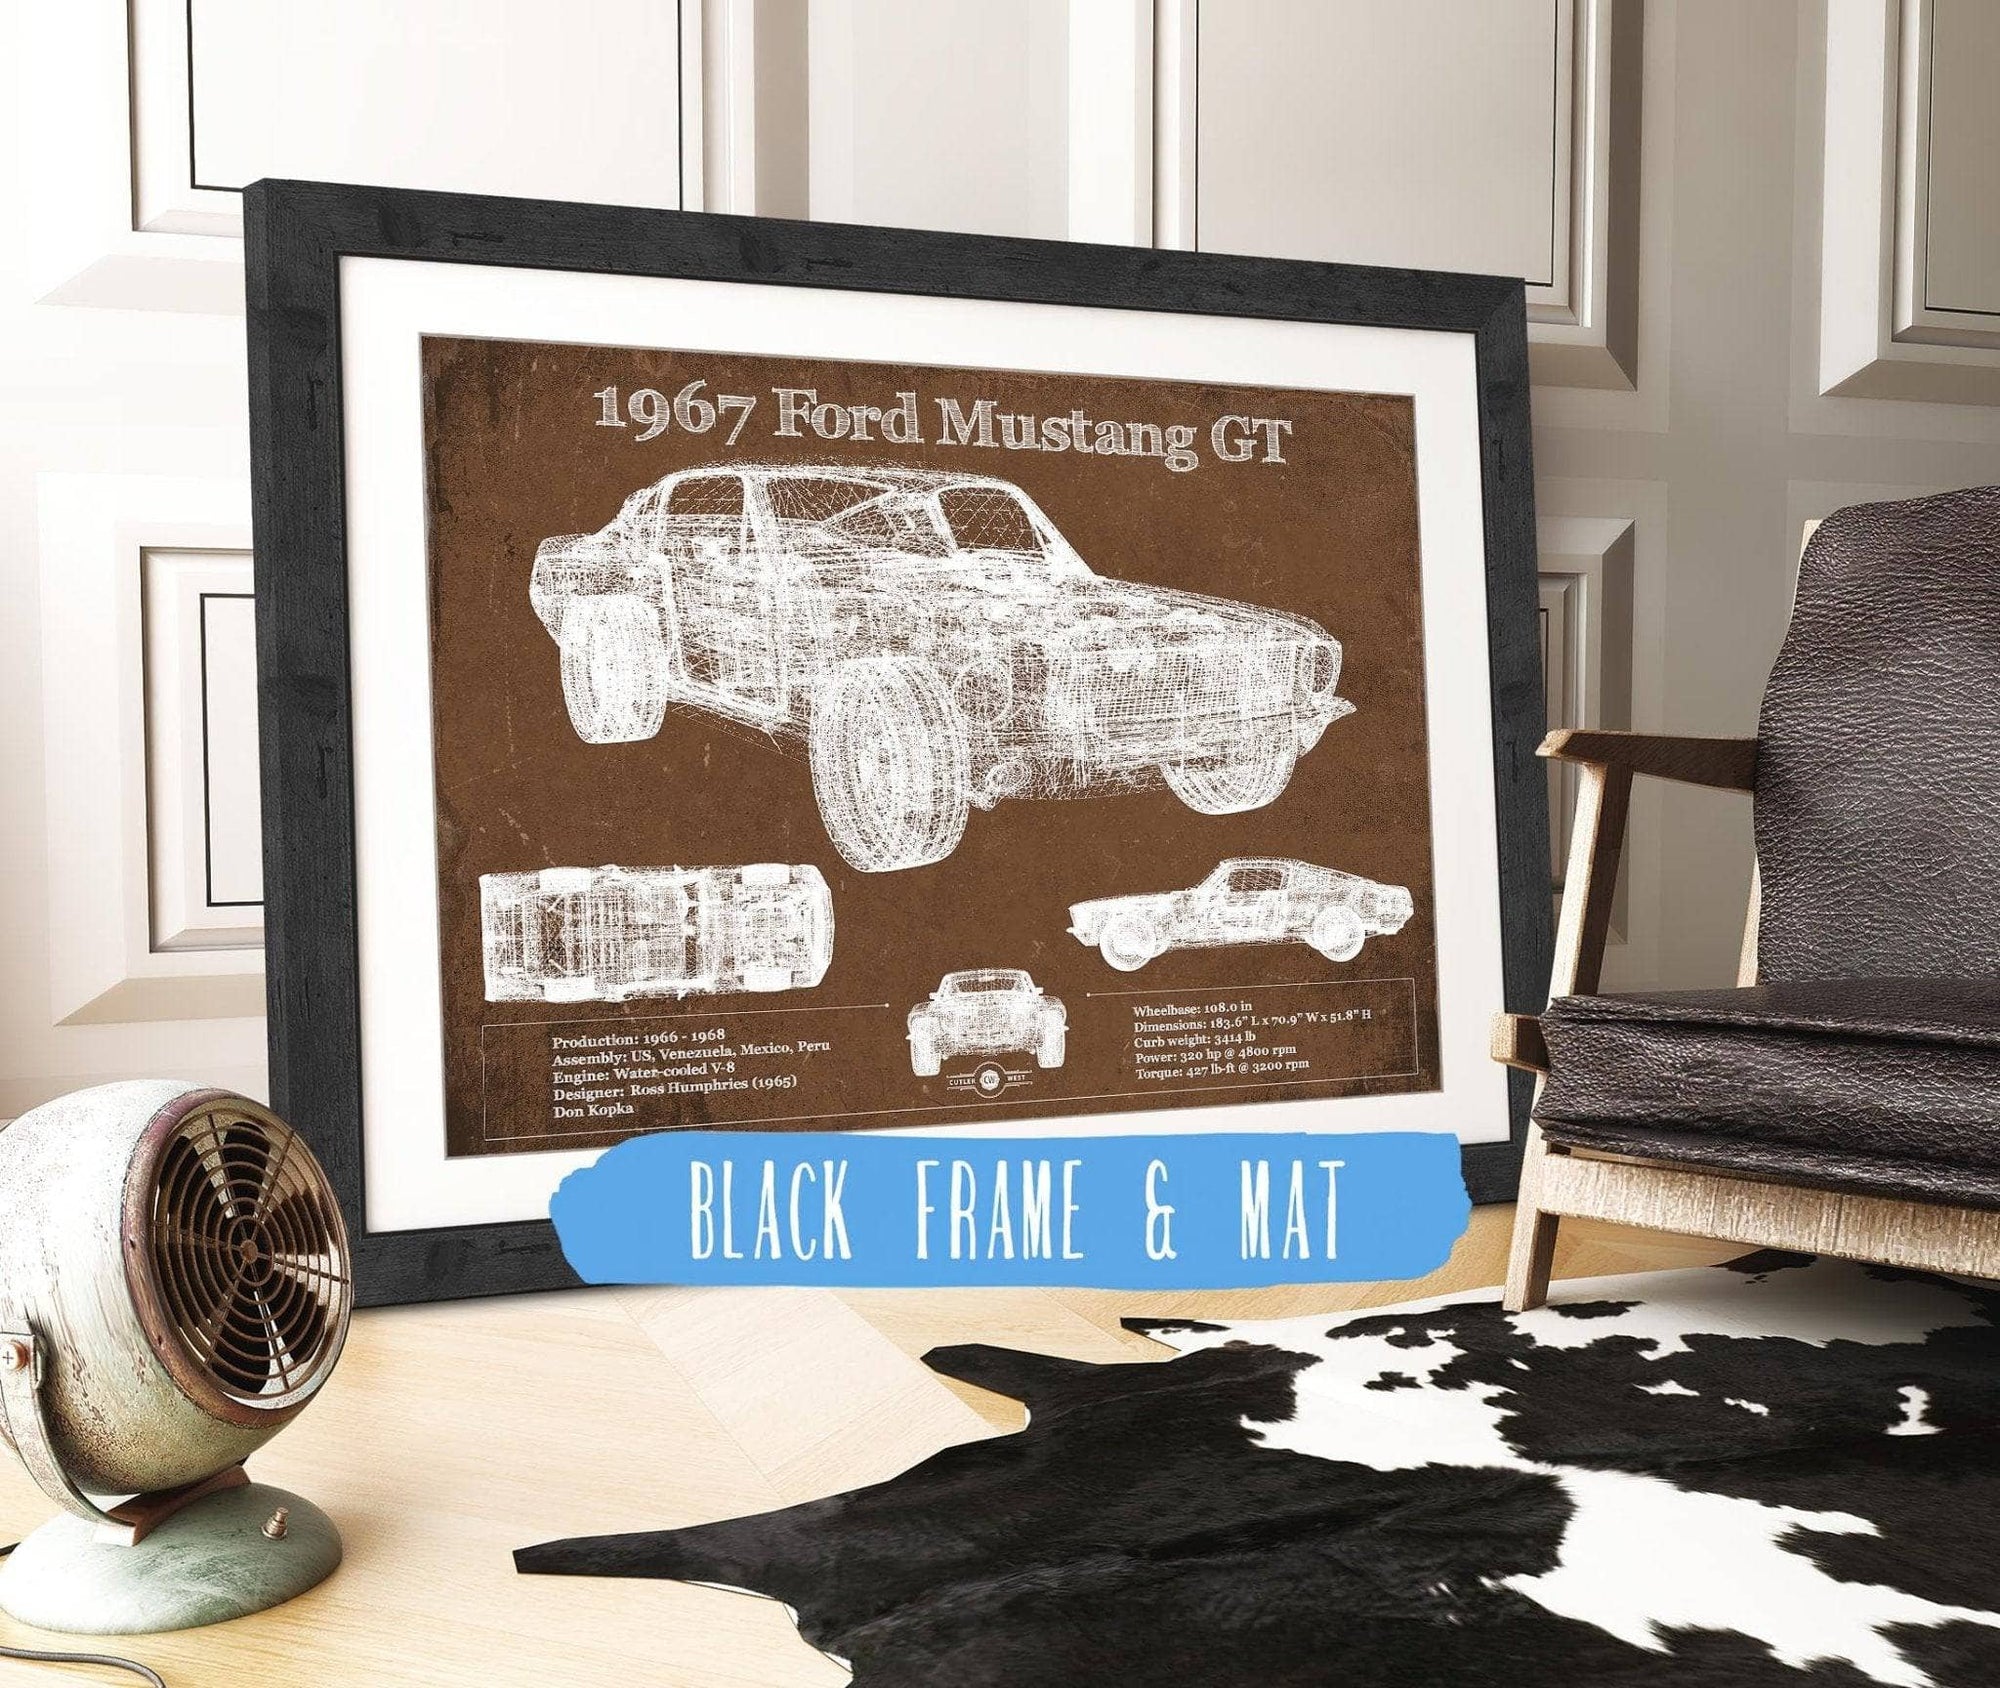 Cutler West Ford Collection 14" x 11" / Black Frame & Mat 1967 Ford Mustang GT Blueprint Vintage Auto Print 933350035_34088